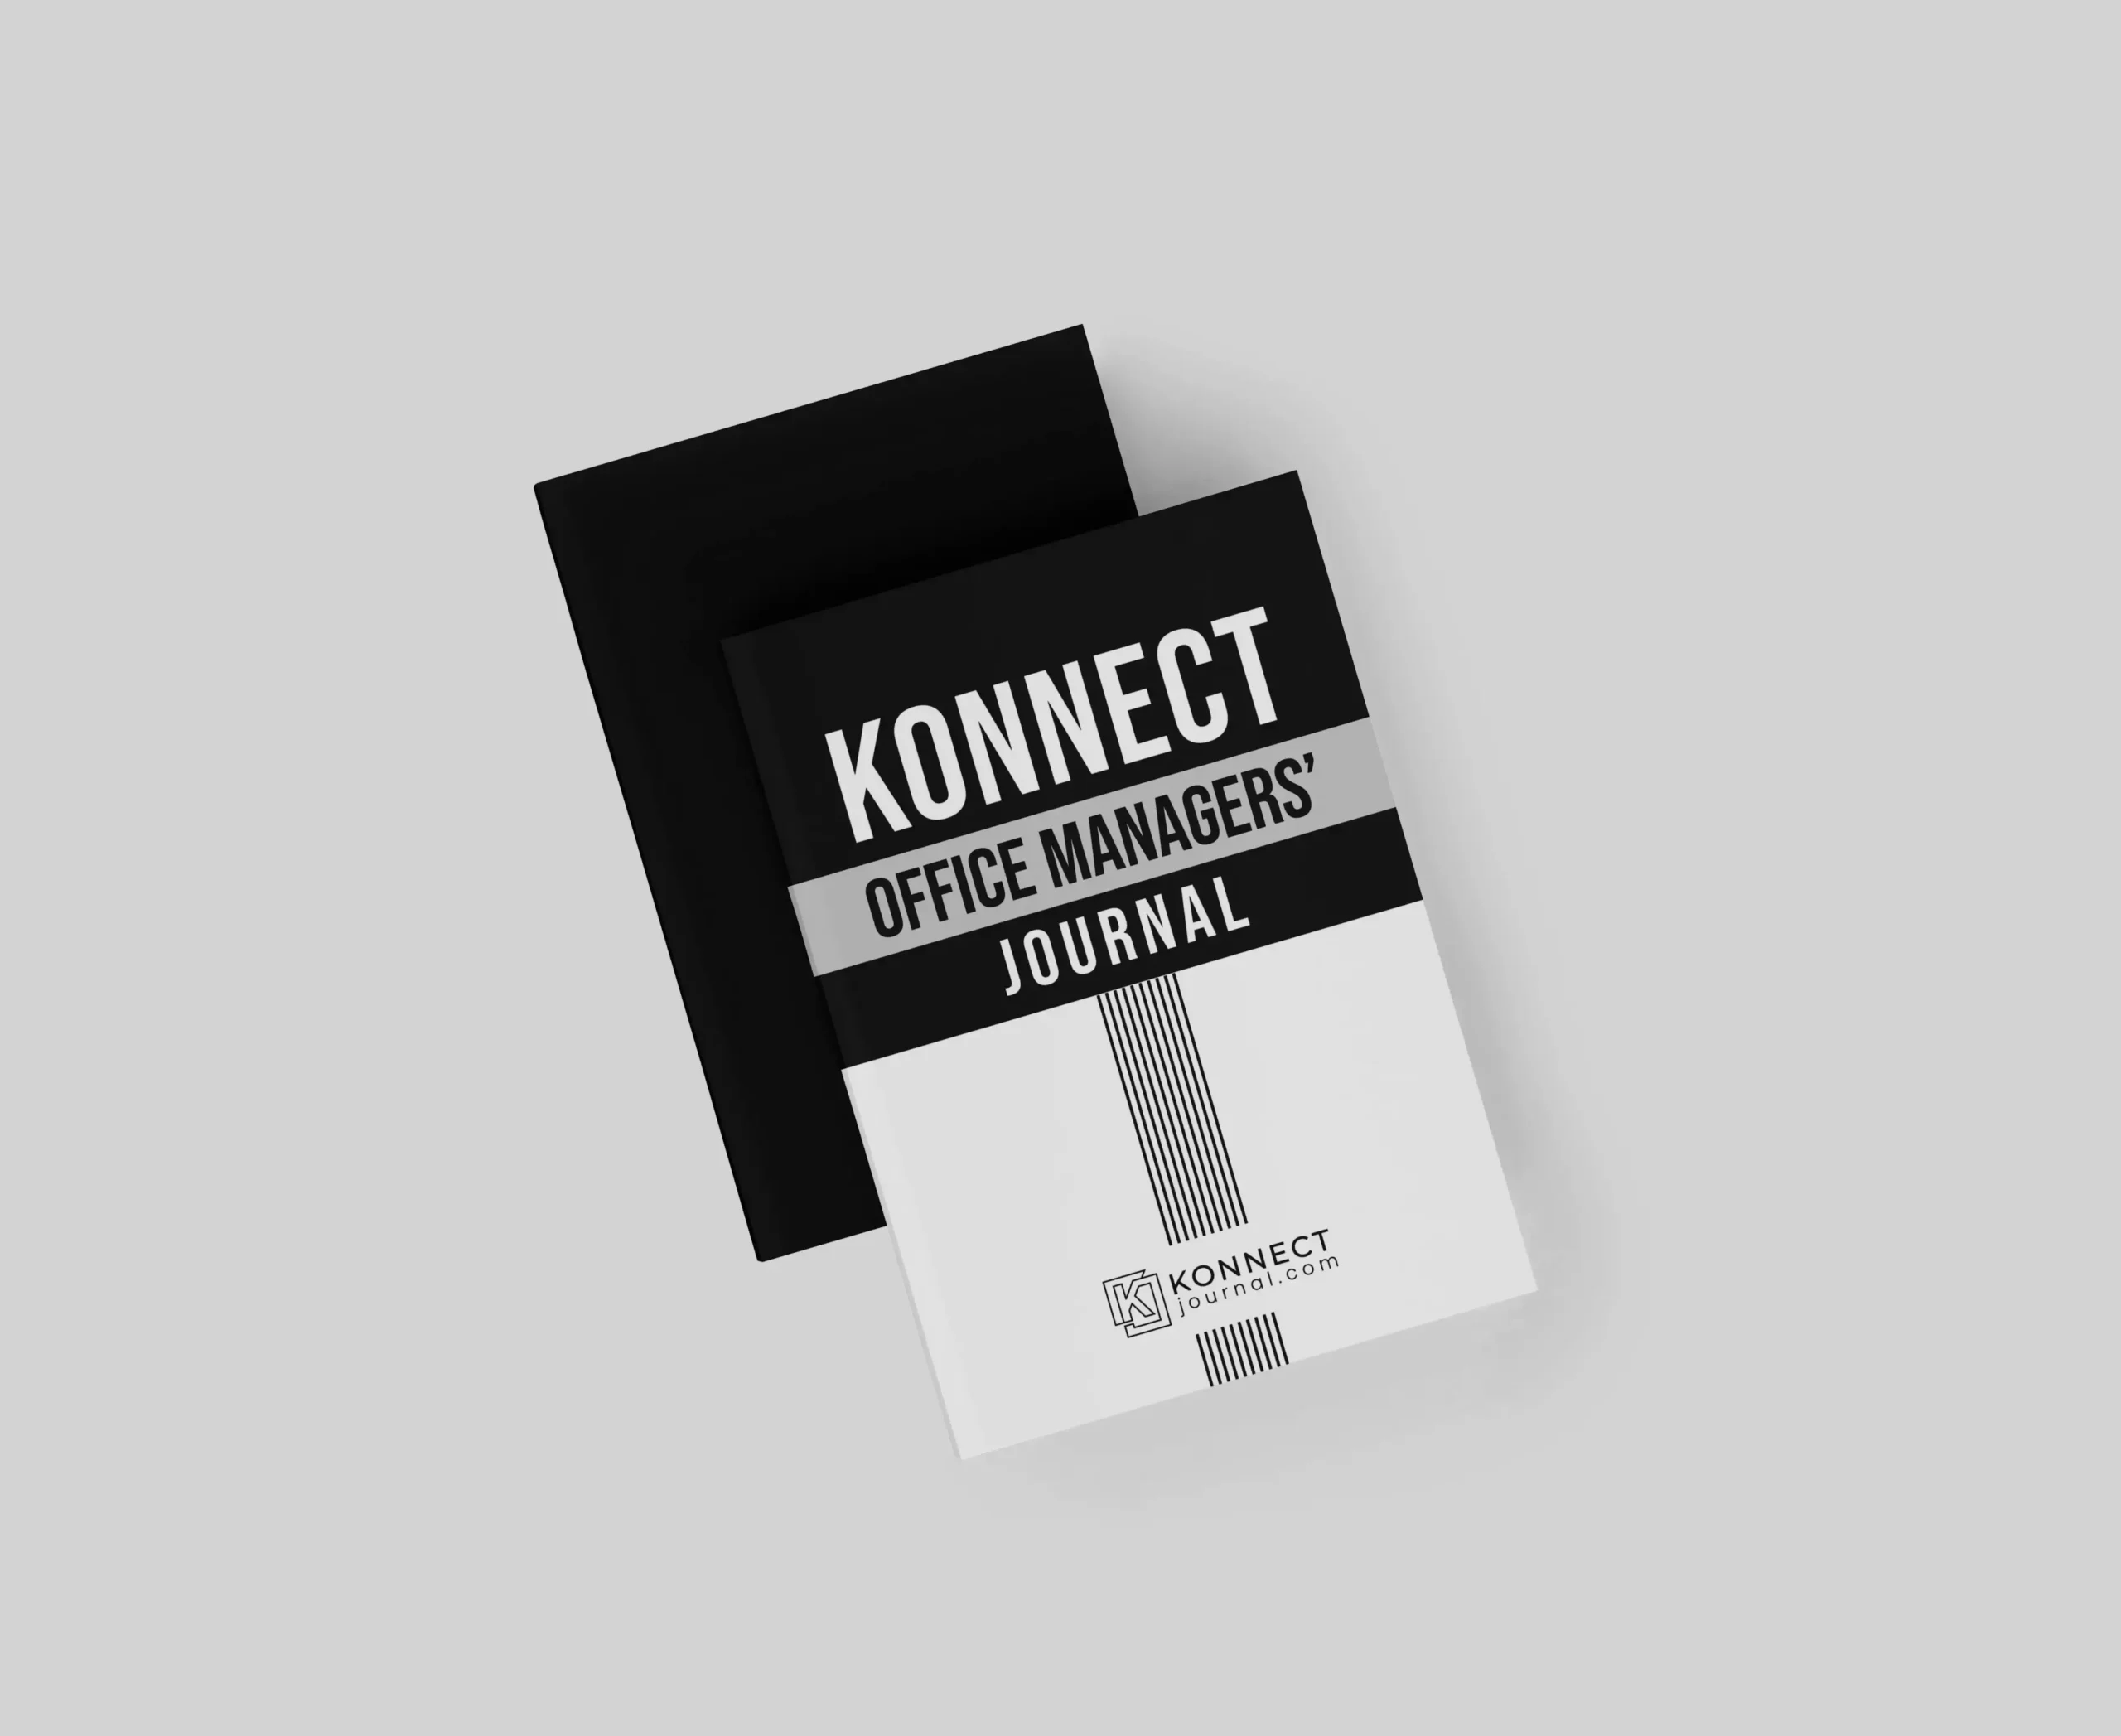 Konnect Office Managers’ Journal